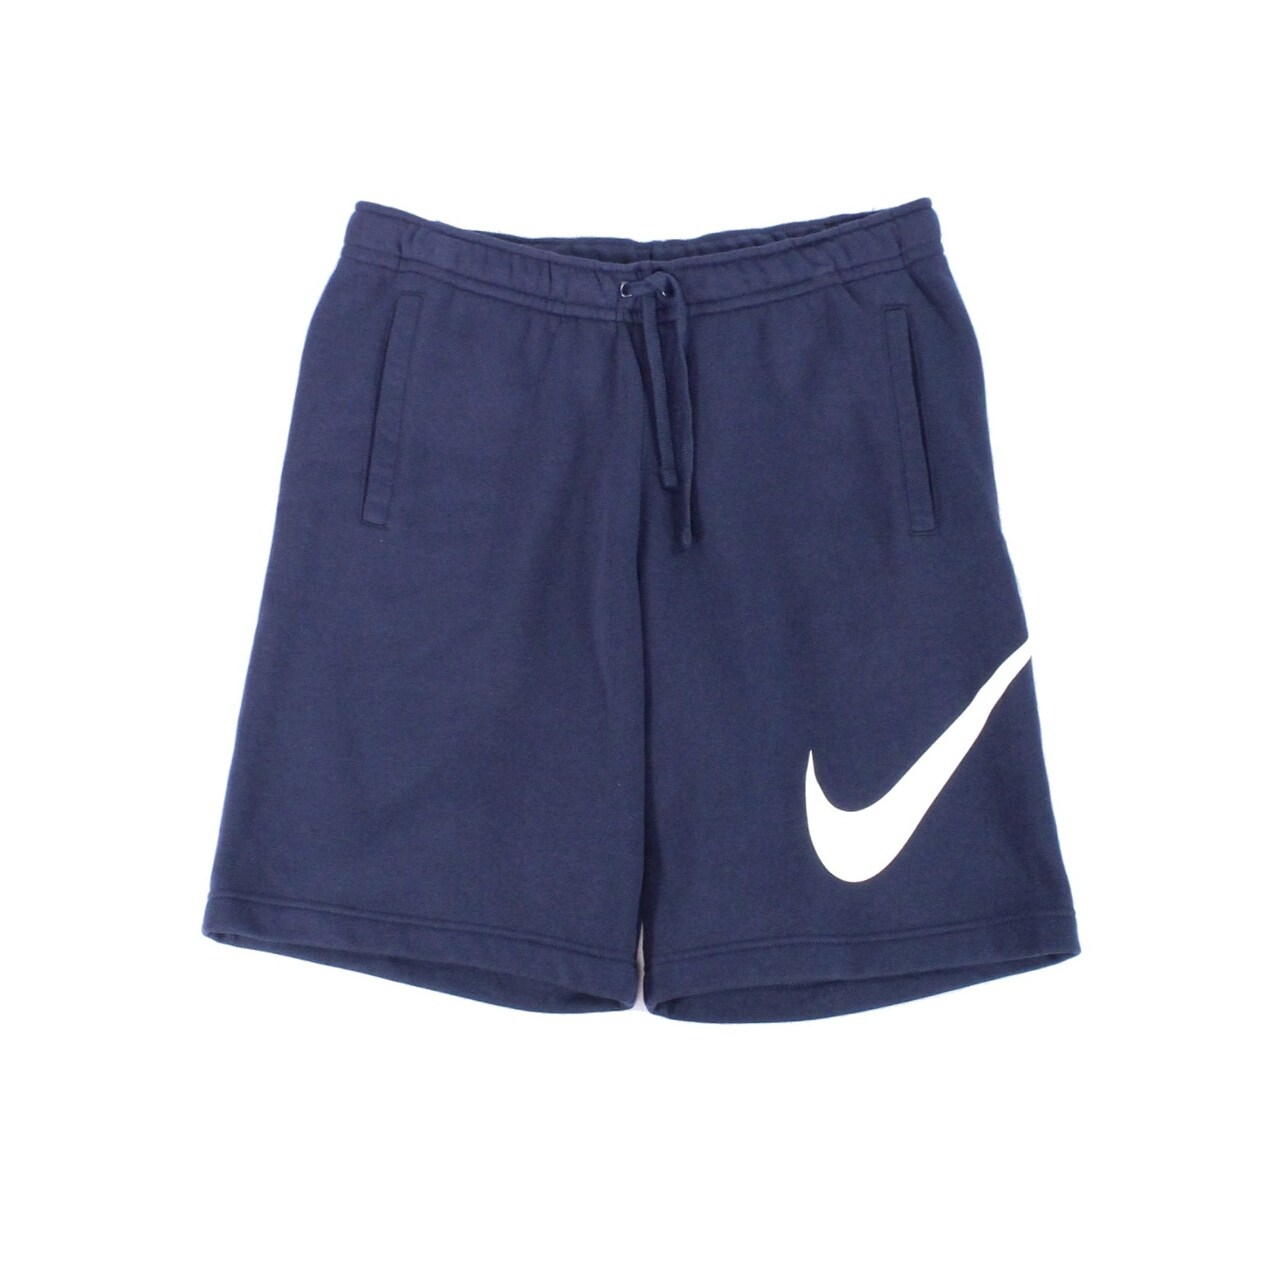 navy blue nike clothes